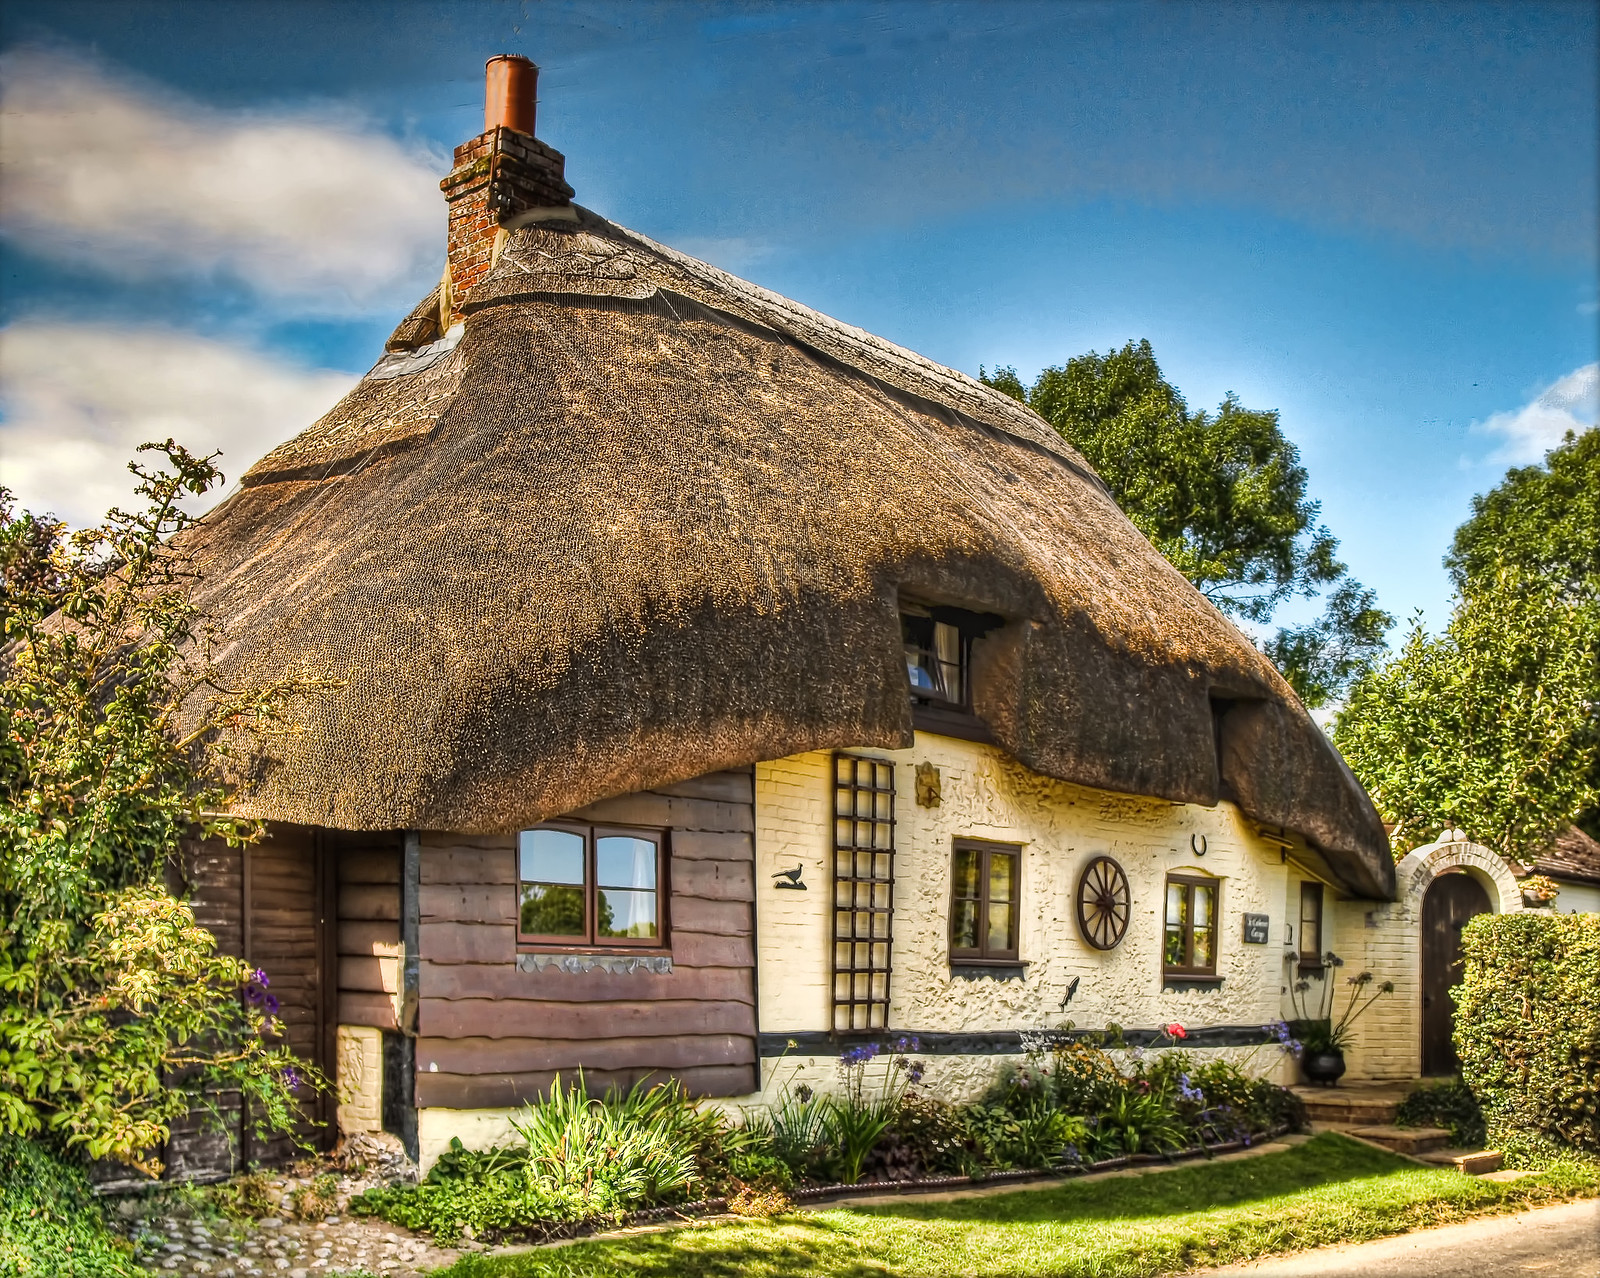 Thatched cottage in the village of Longstock in Hampshire. Credit Anguskirk